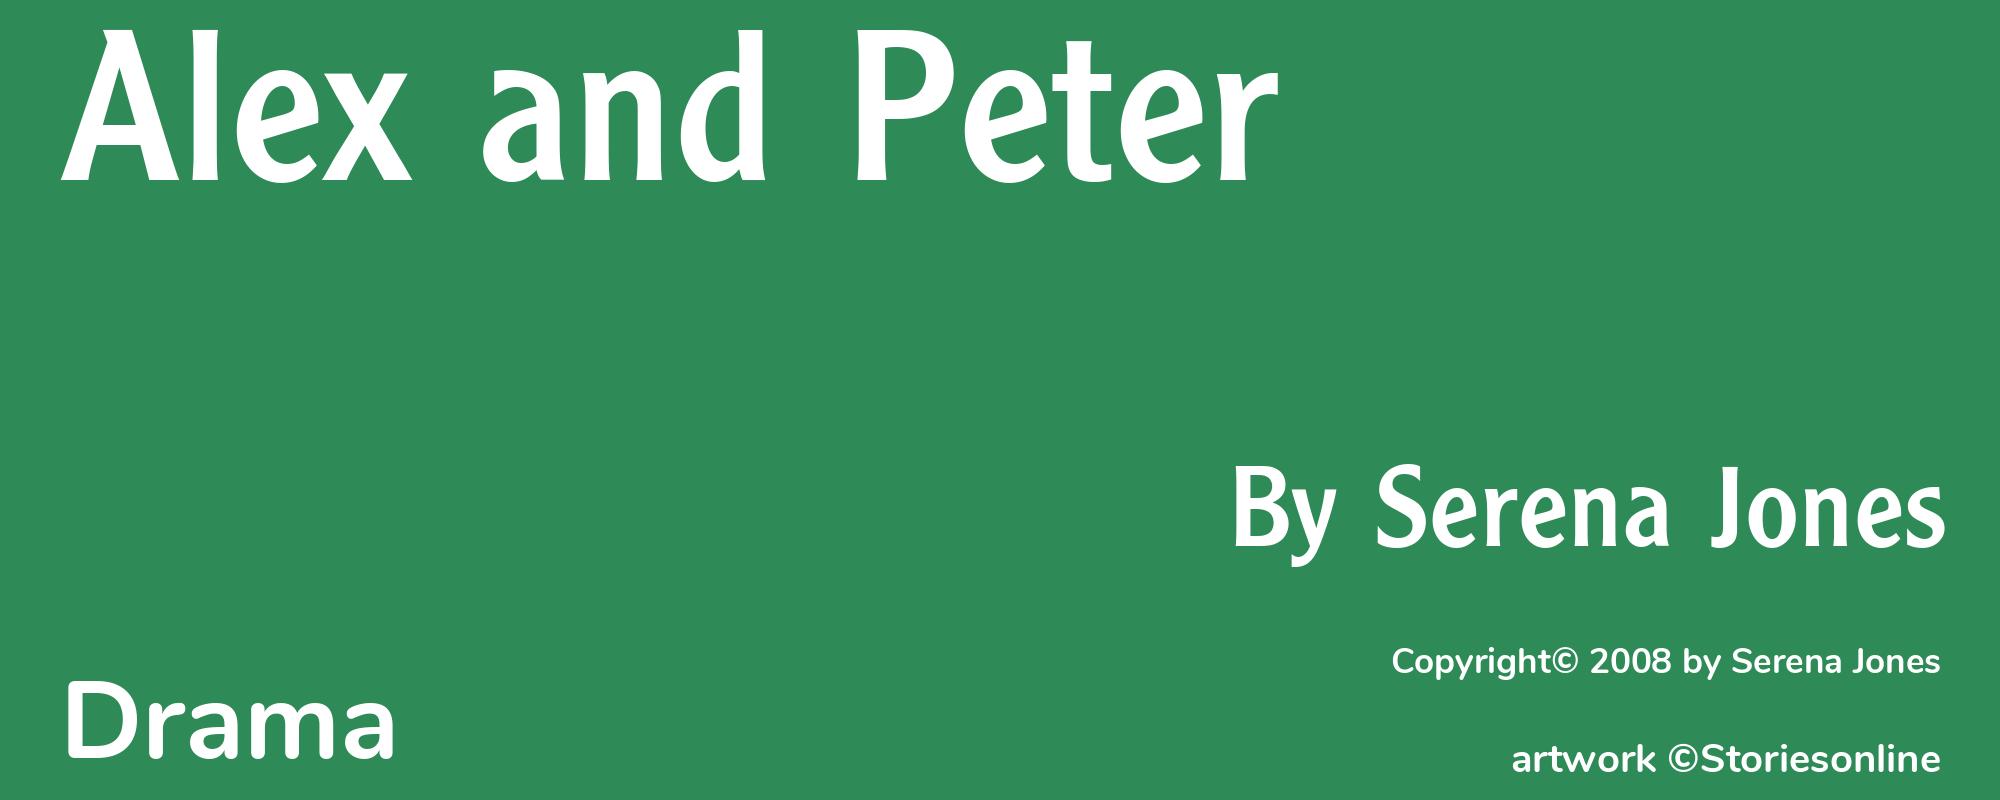 Alex and Peter - Cover